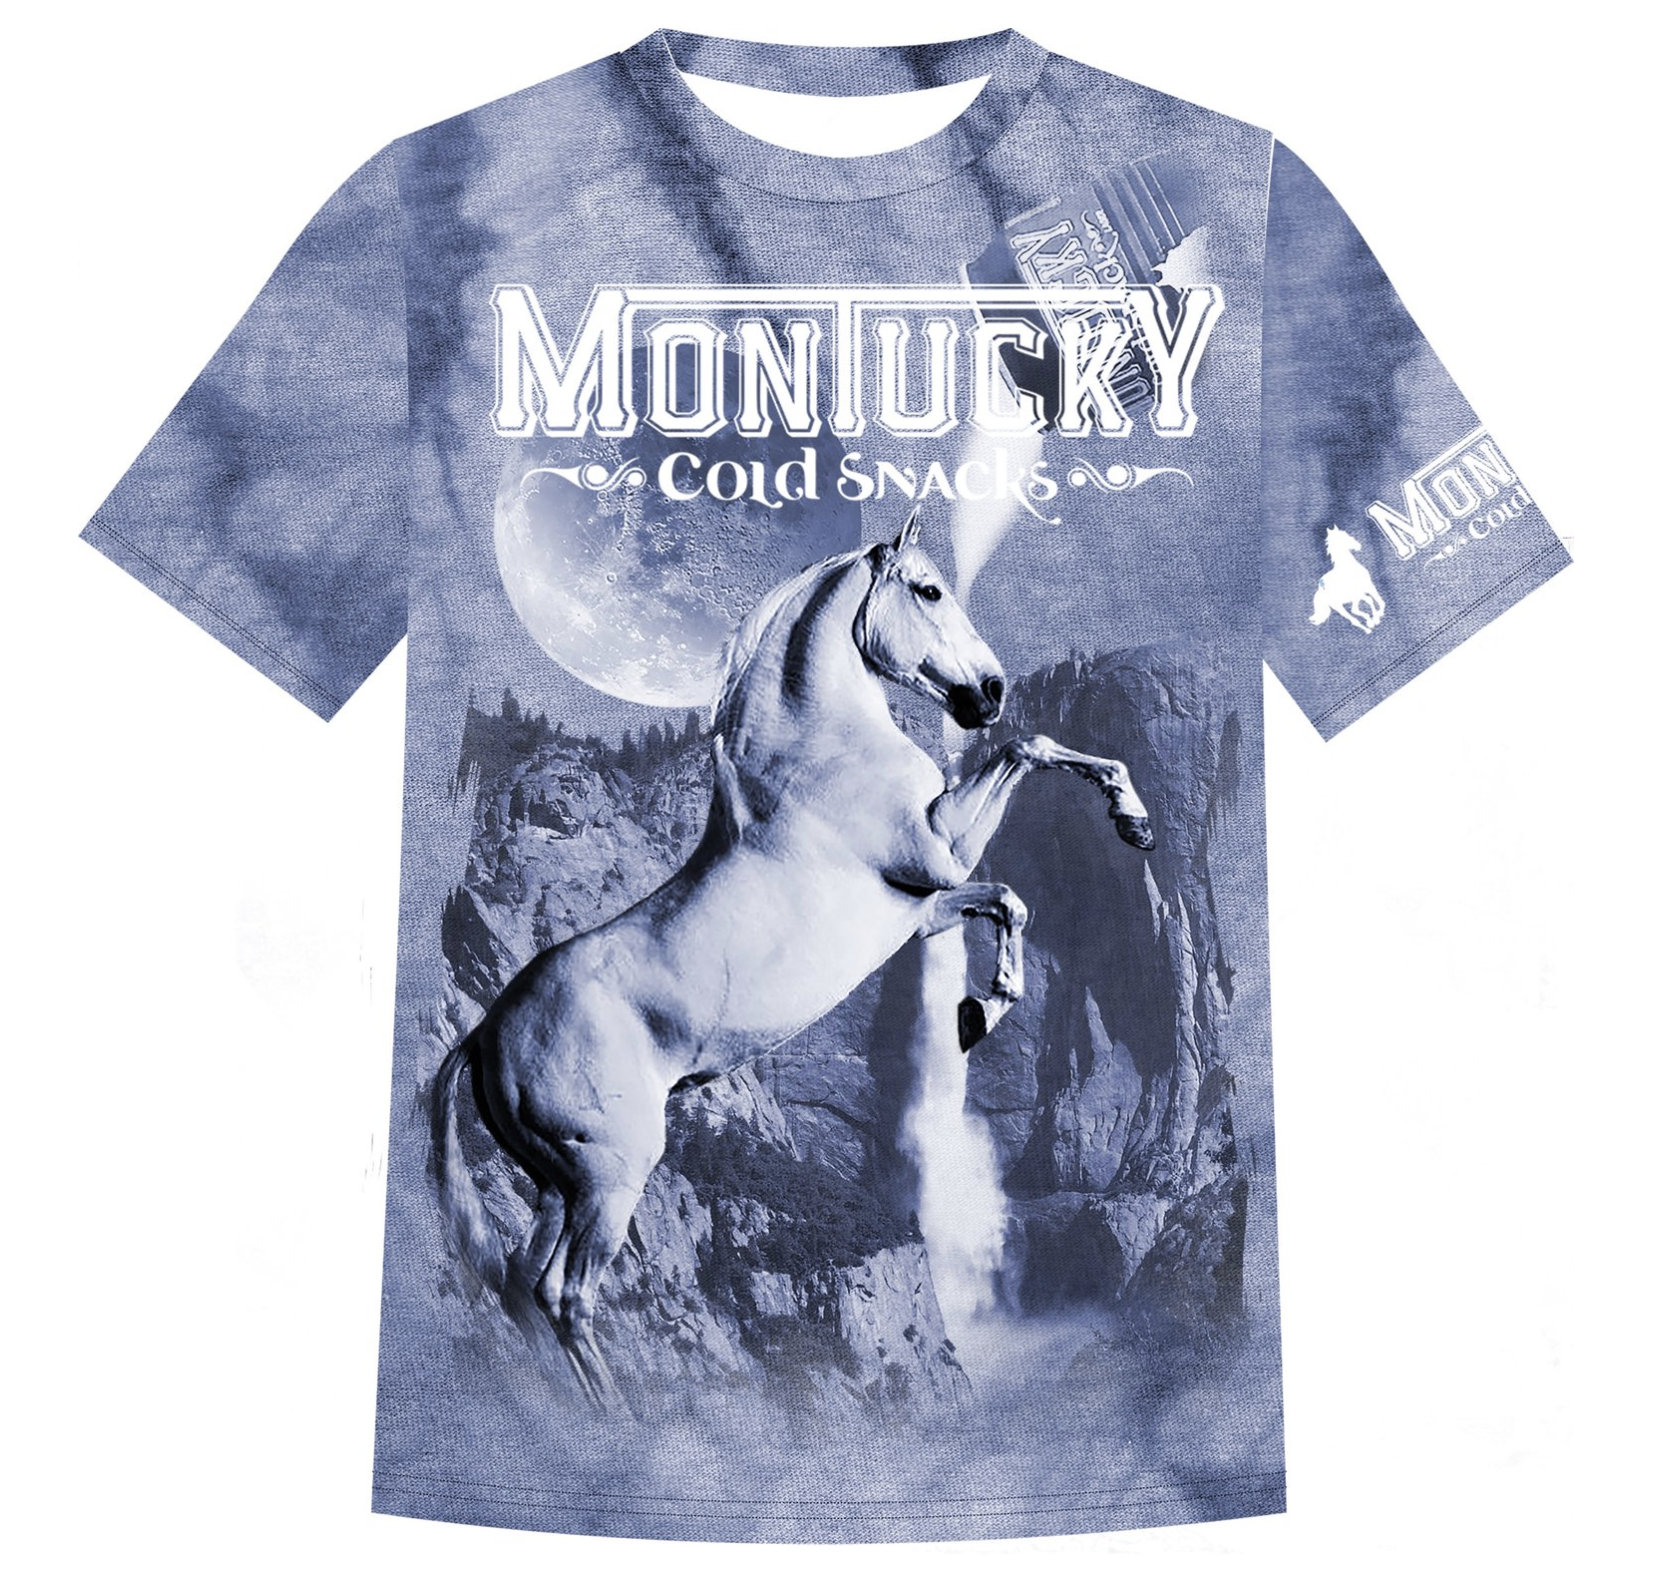  Montucky Cold Snacks Gas Station T-Shirt Competition Winner, 2017 